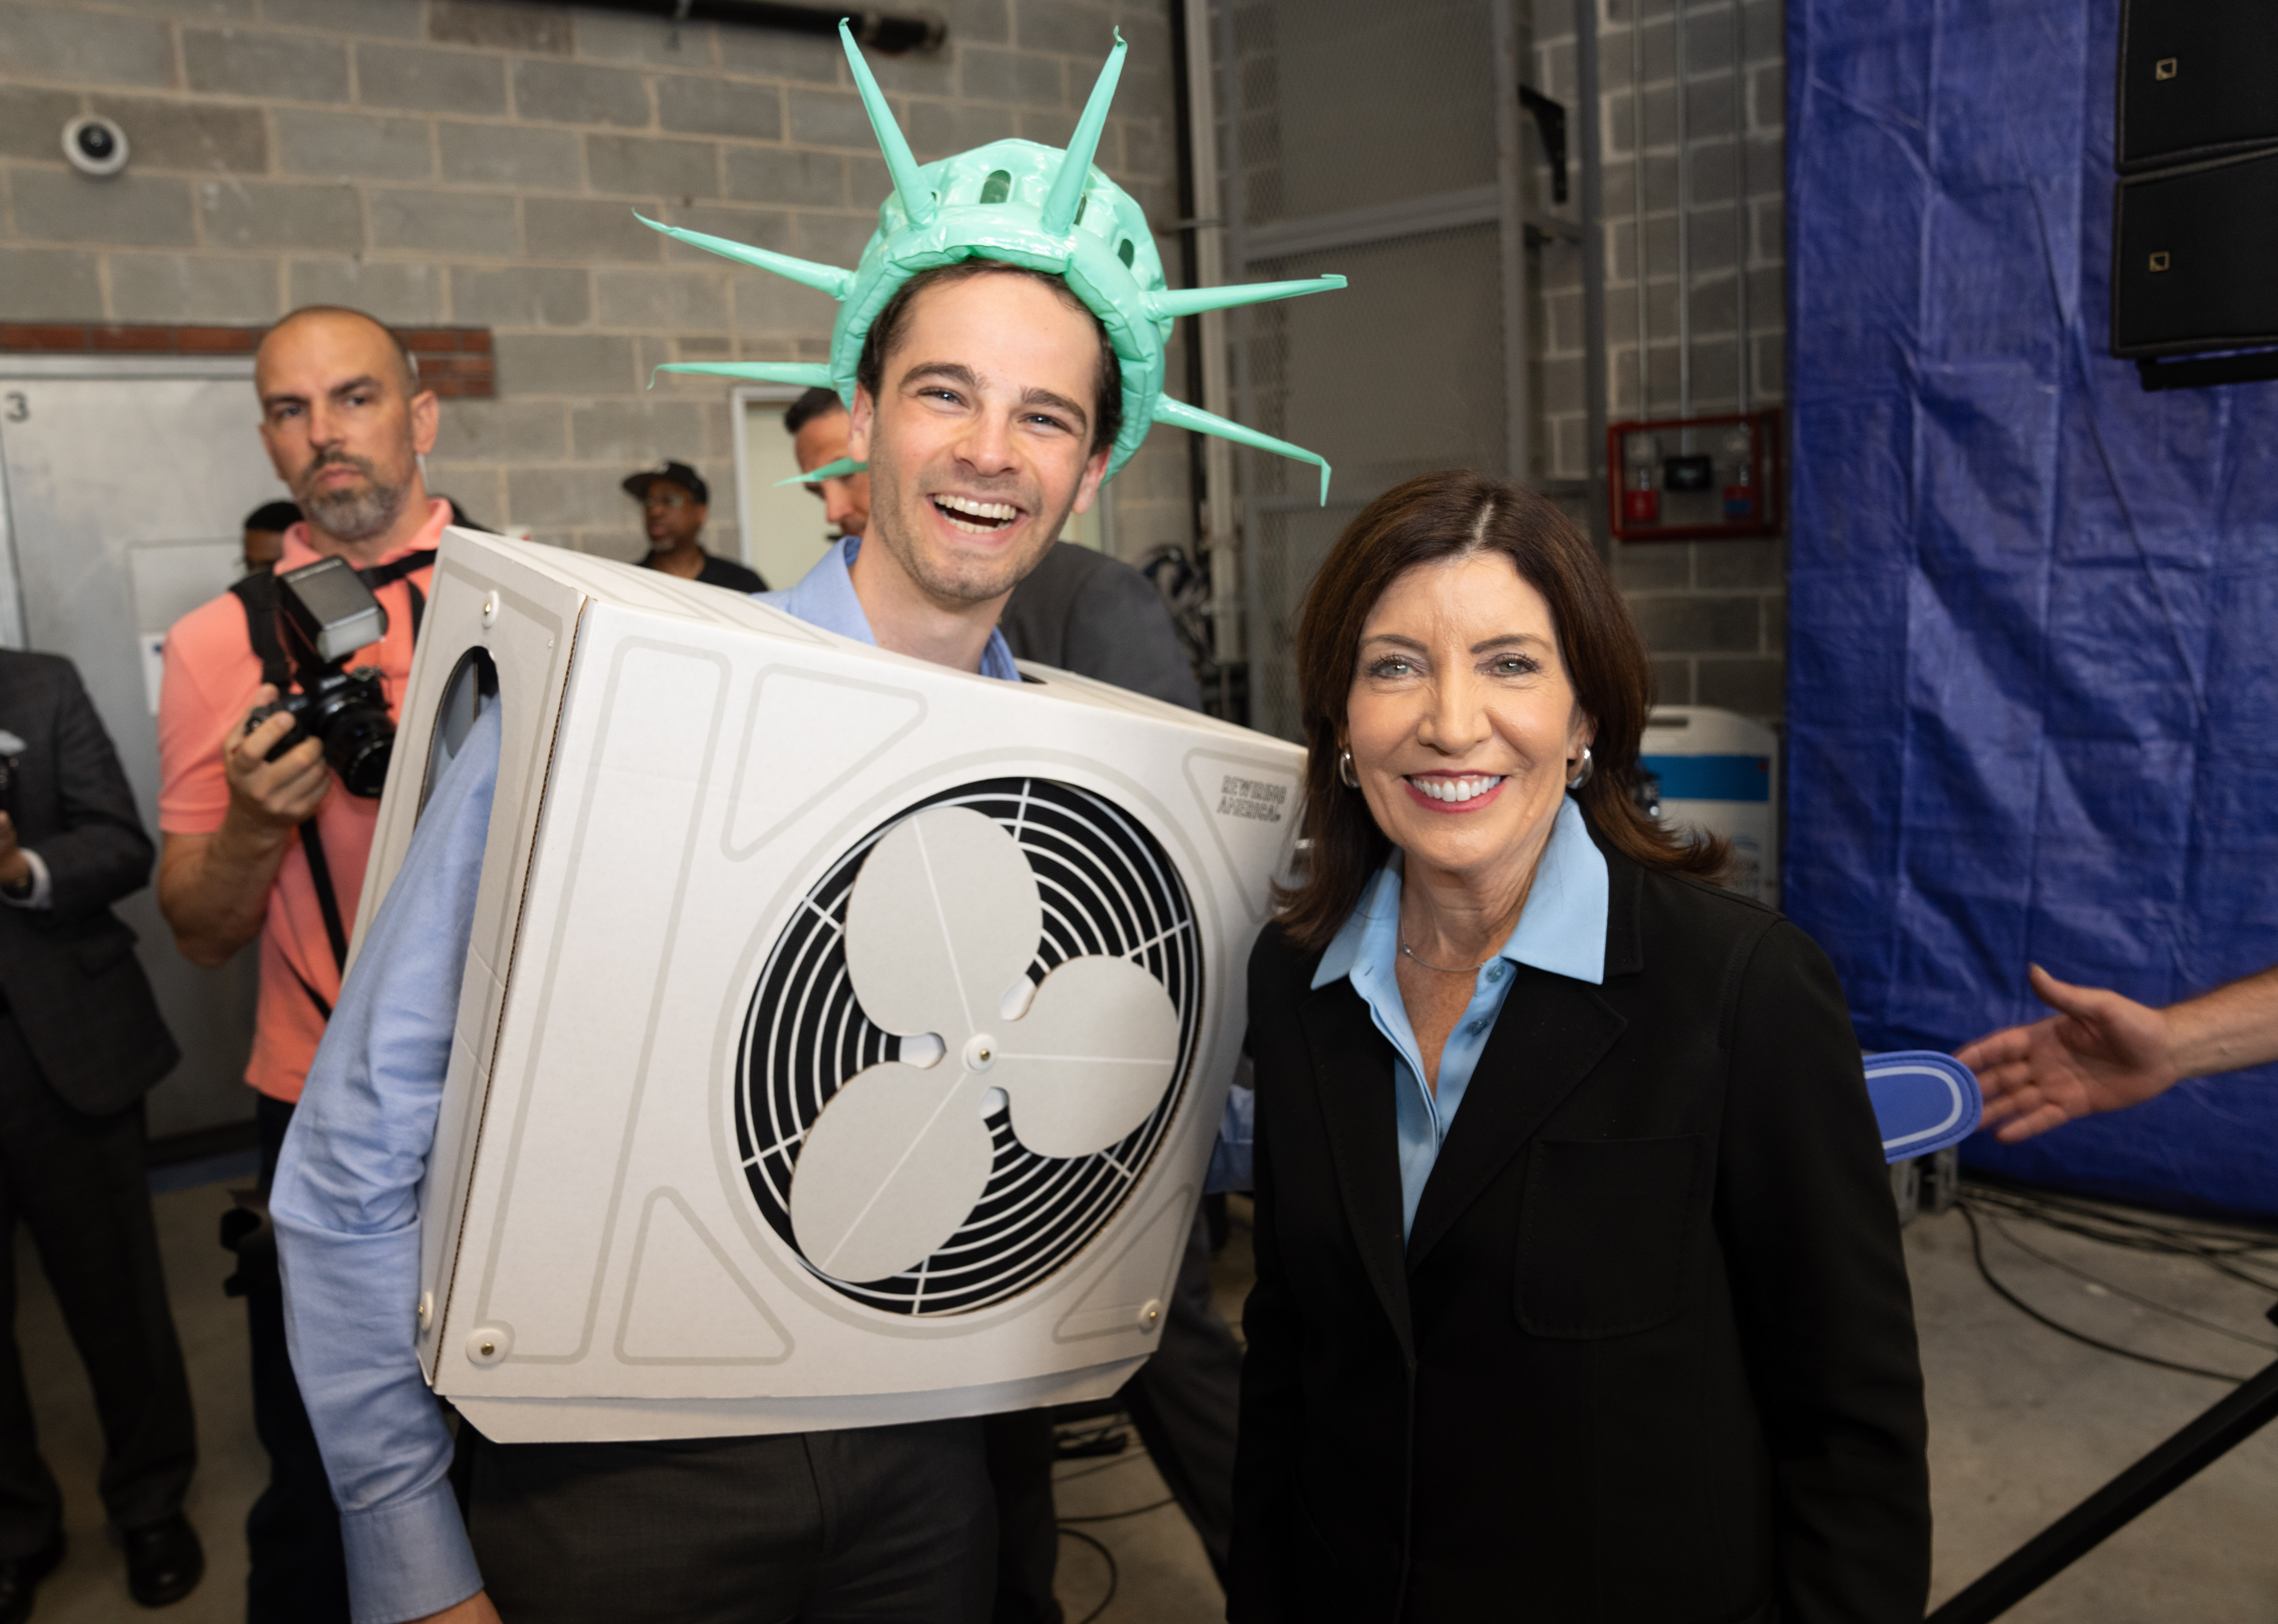 Gov. Kathy Hochul smiles with a man in a silly heat pump costume.